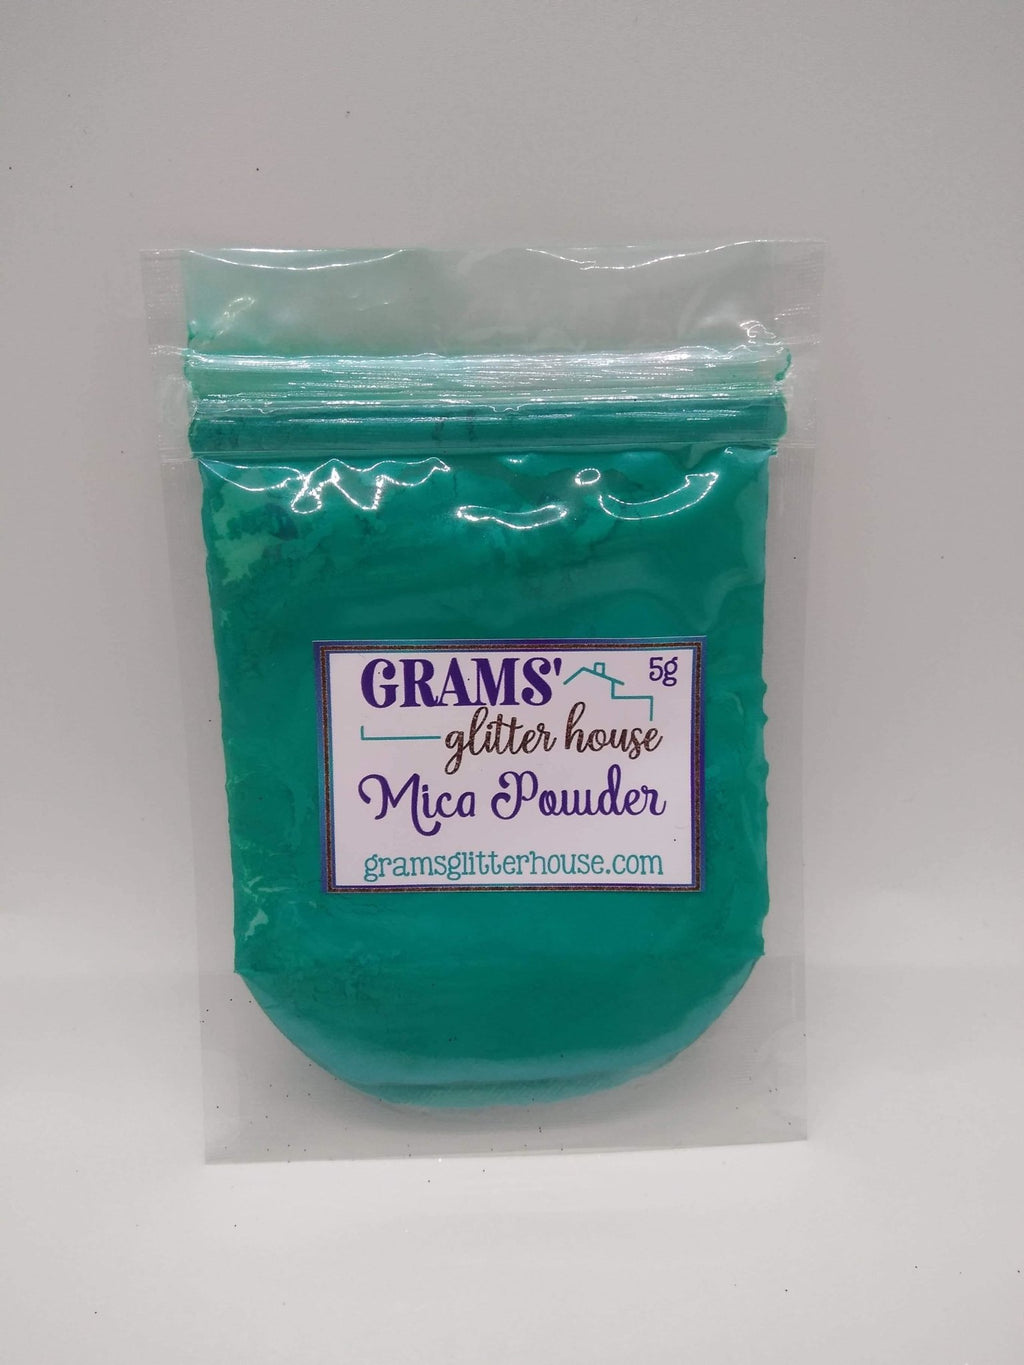 Turquoise 33 Grams' Glitter House Turquoise Mica Powder Pigment